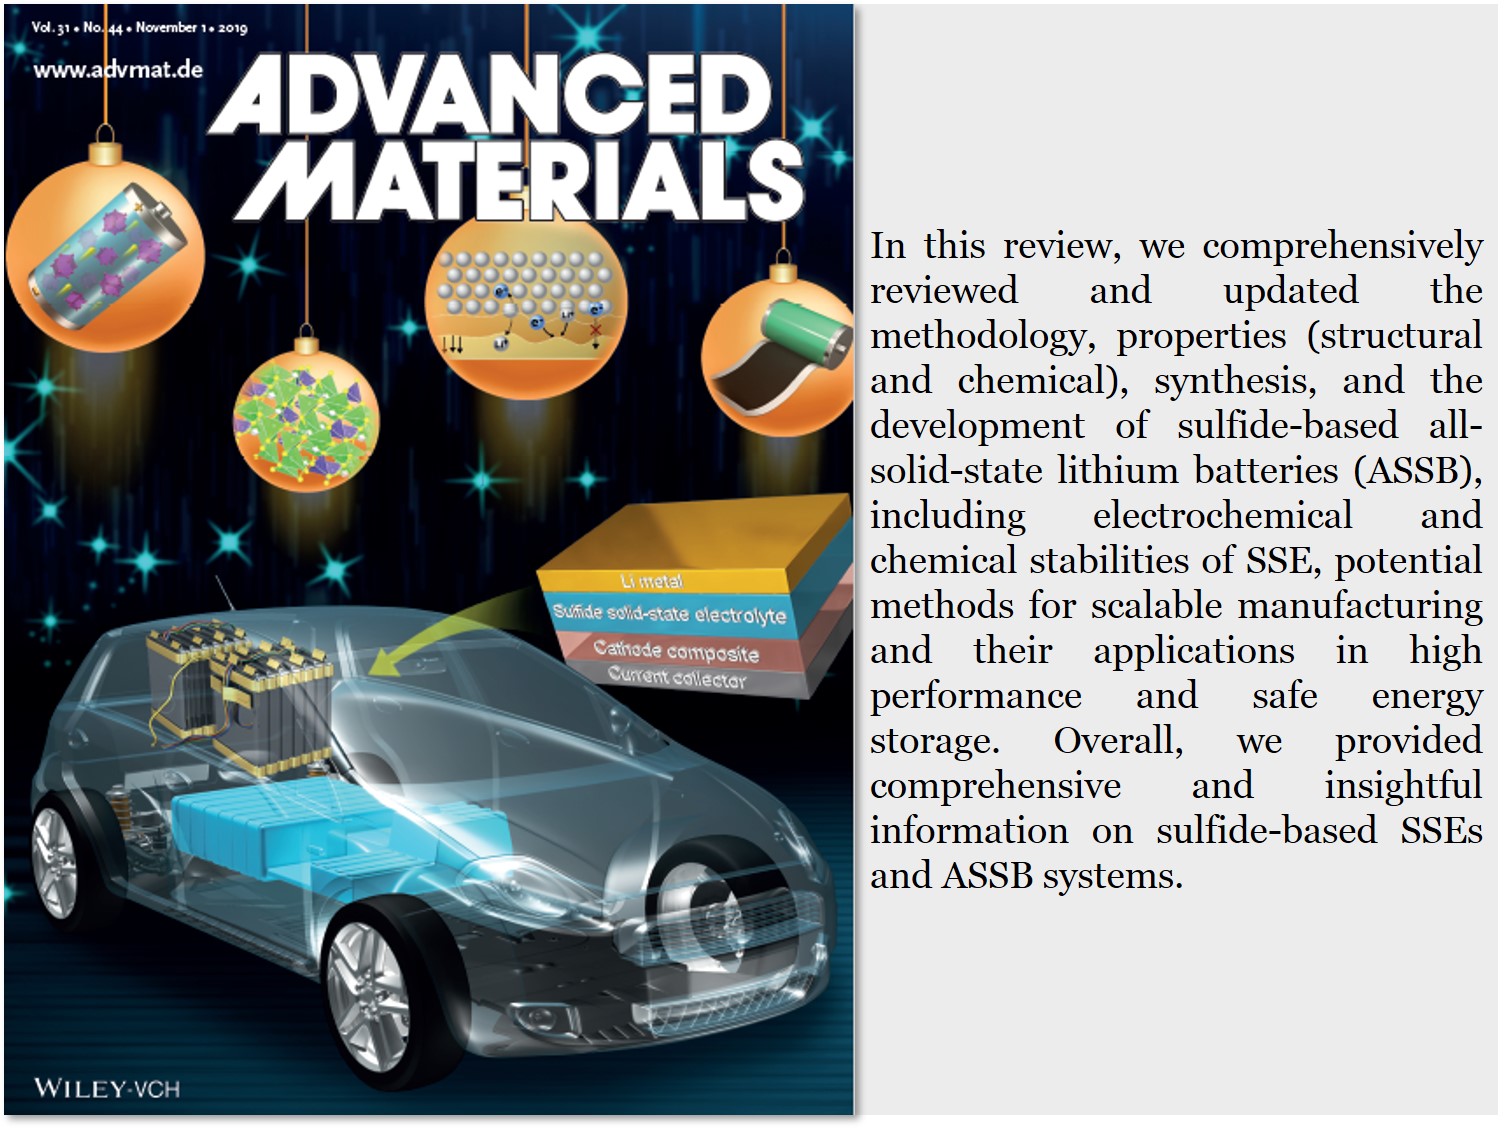 Electrolyte Materials in Lithium-Ion Batteries - Advancing Materials